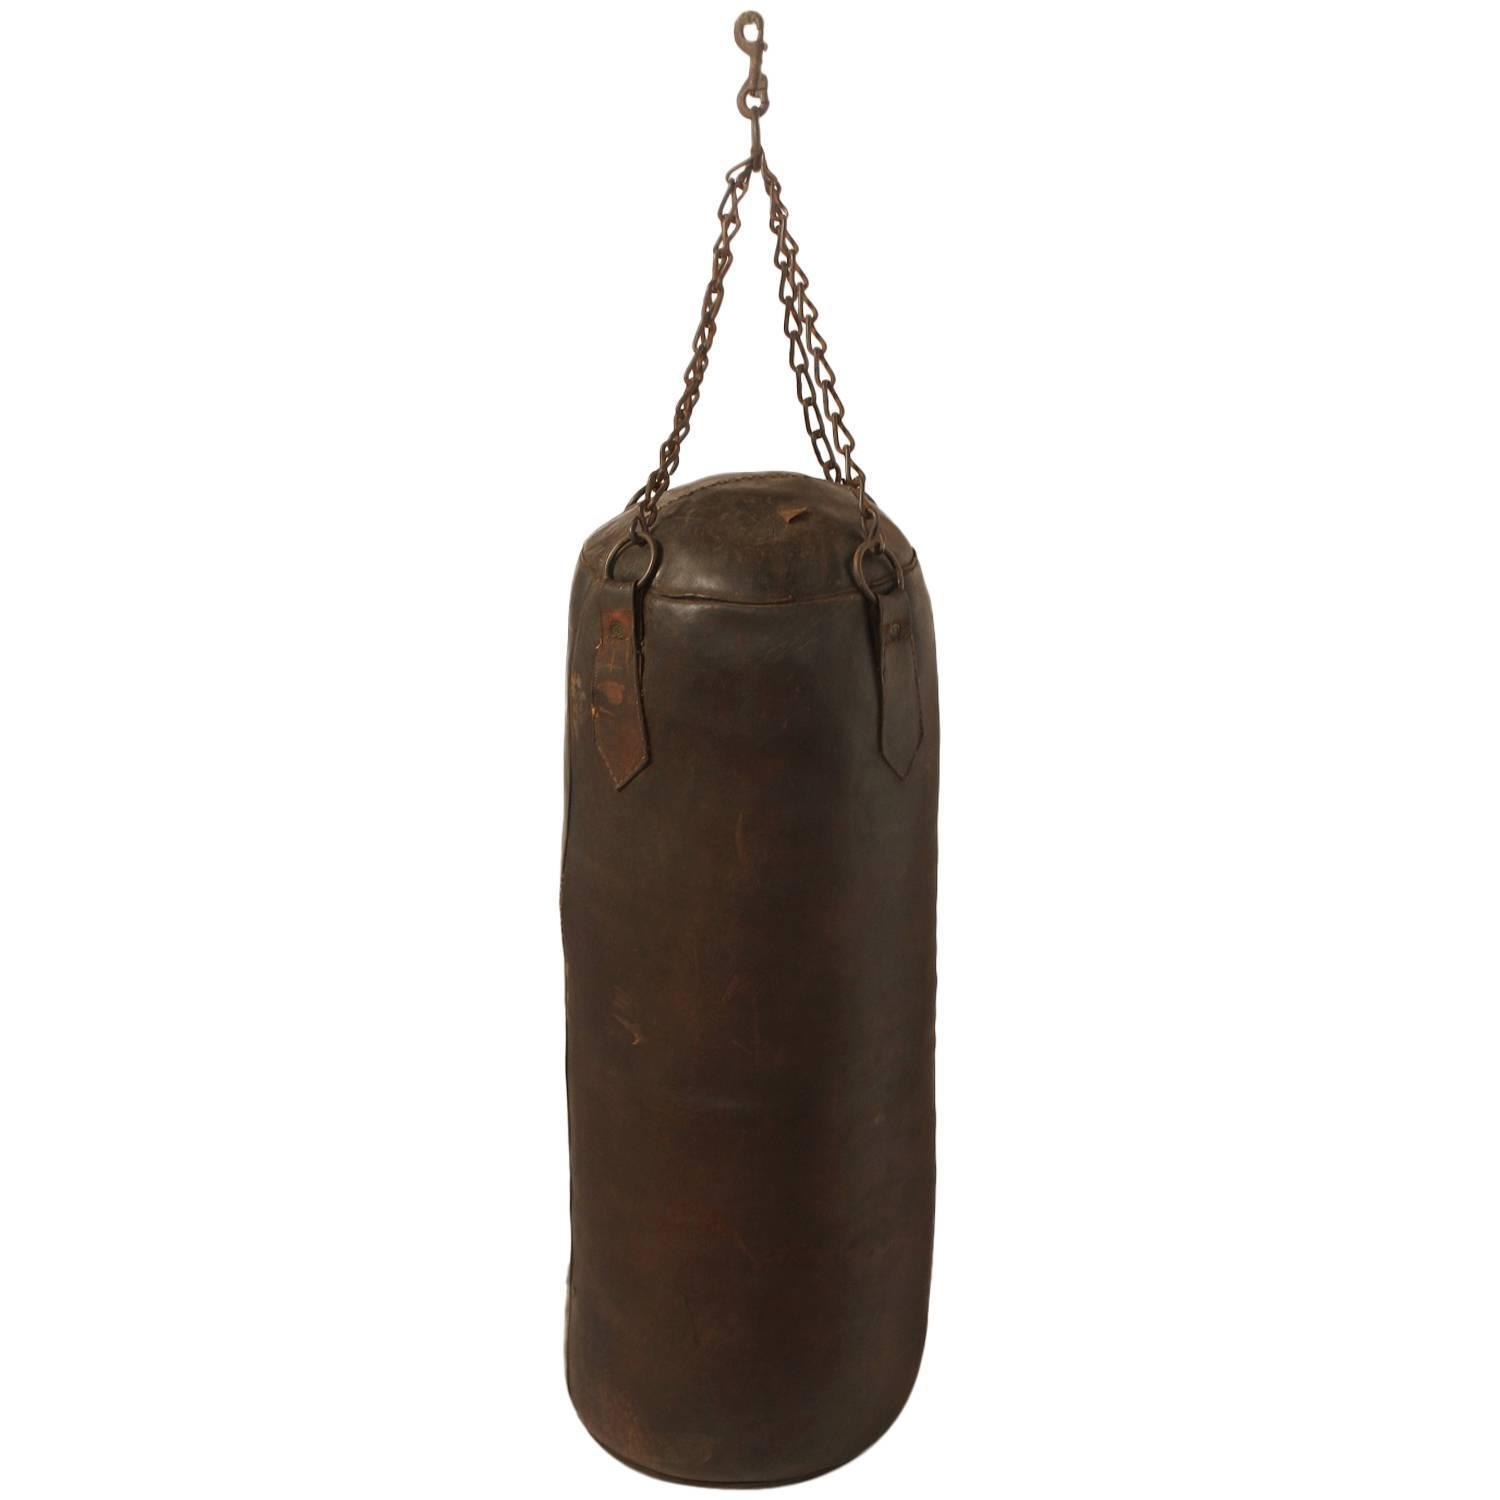 Antique American Boxing Punching Leather Bag For Sale at 1stdibs